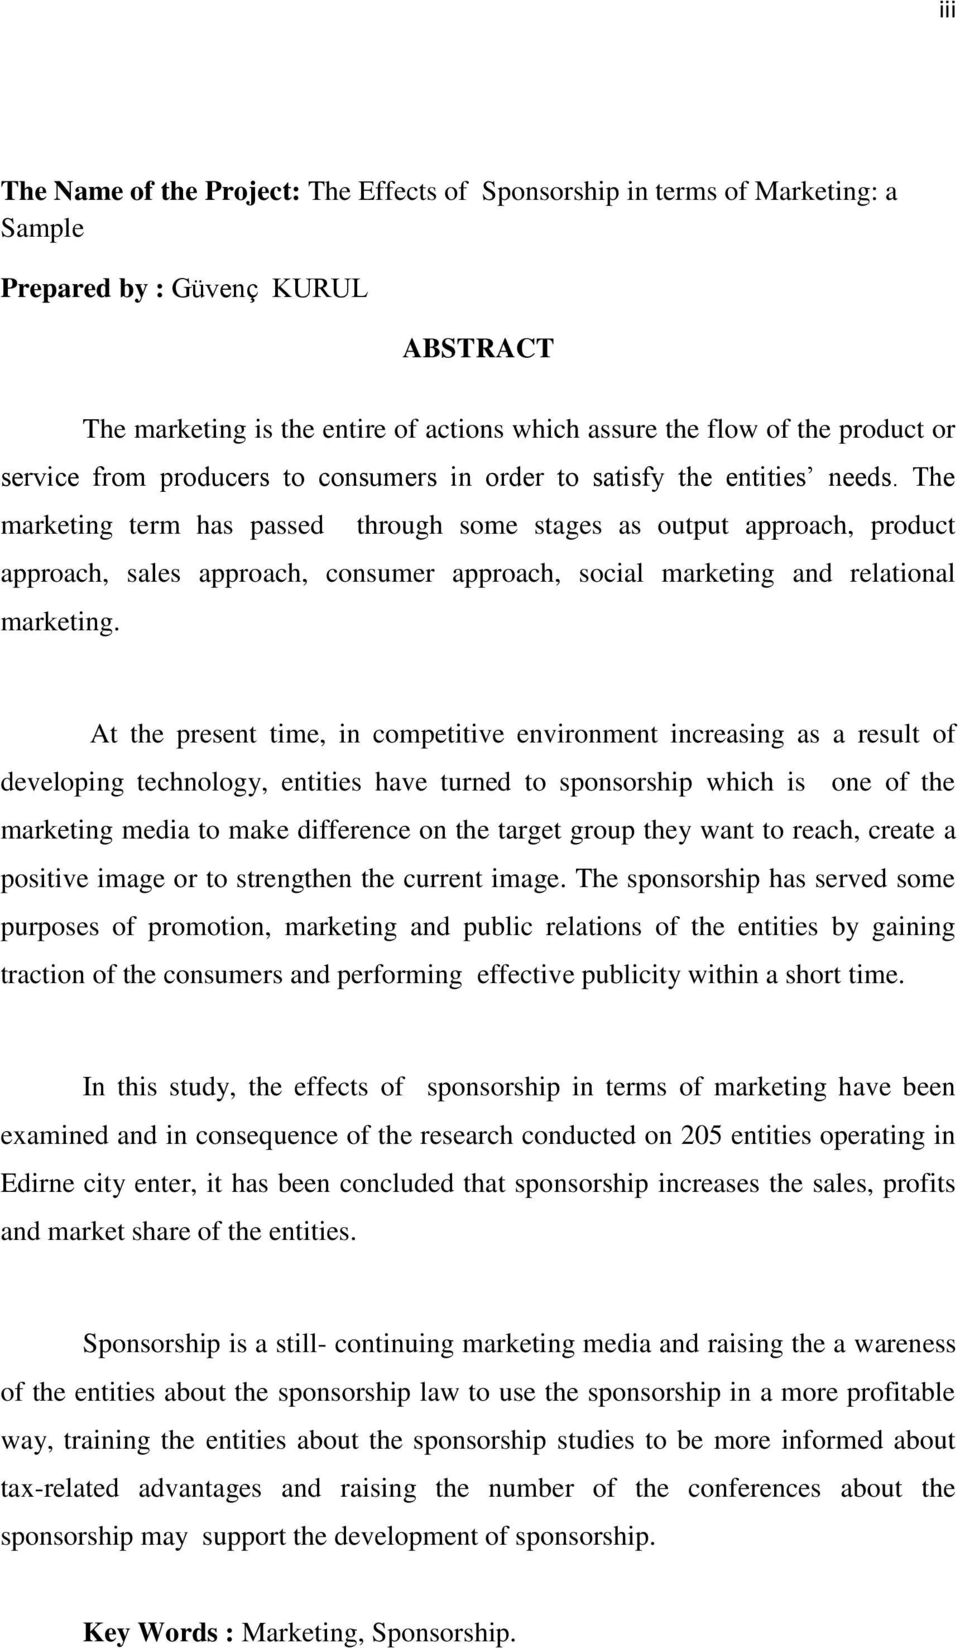 The marketing term has passed through some stages as output approach, product approach, sales approach, consumer approach, social marketing and relational marketing.